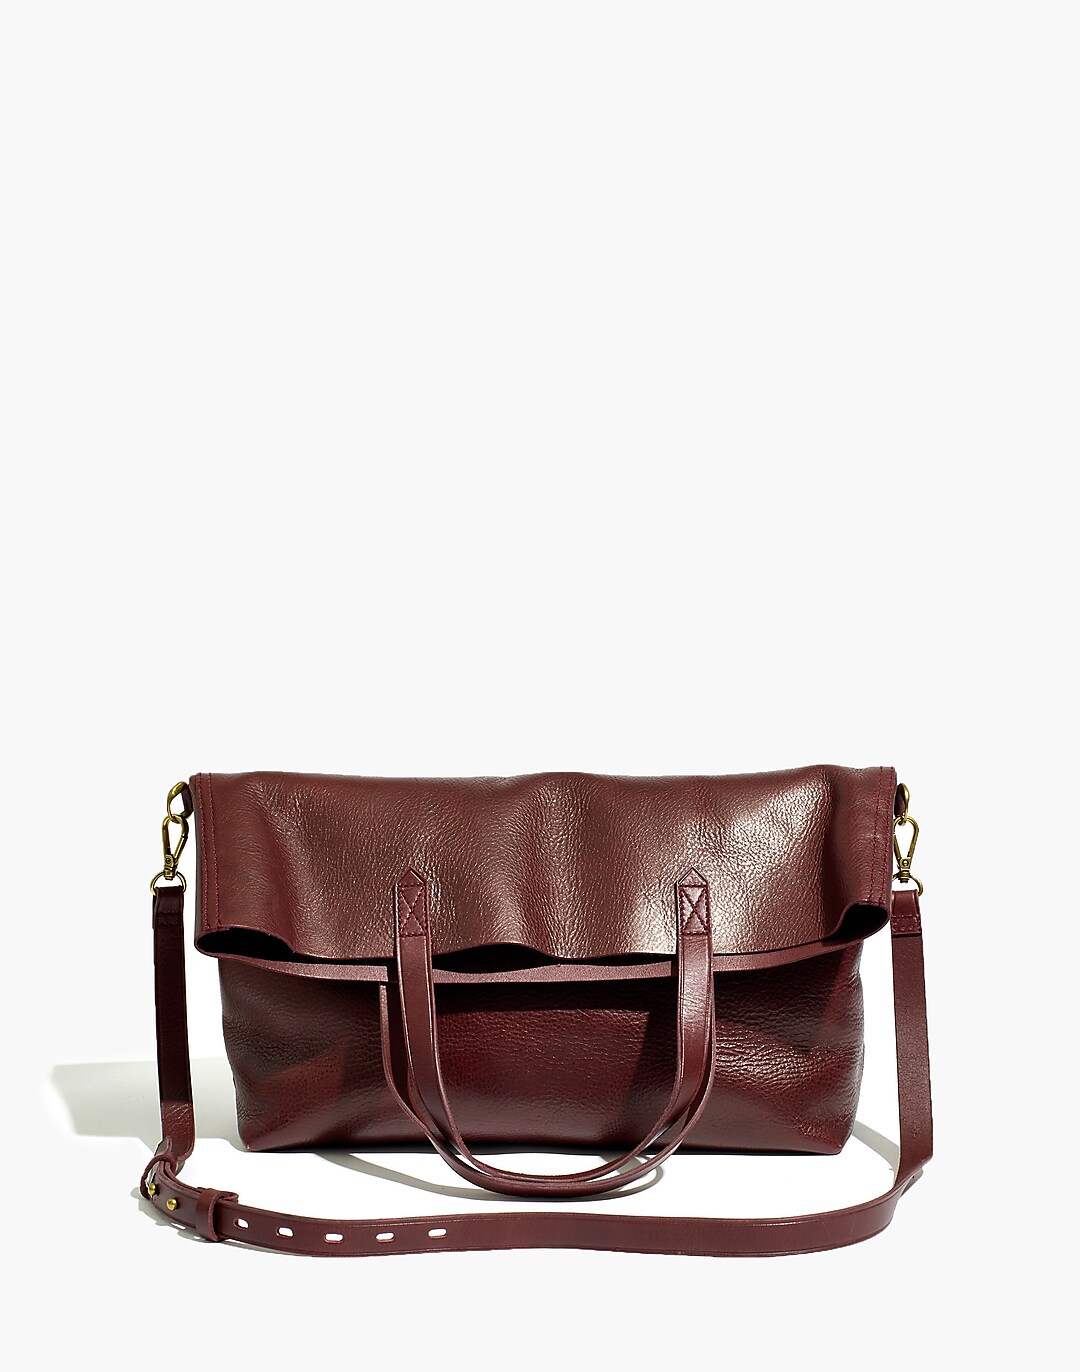 Madewell The Foldover Transport Tote Dark Cabernet NEW WITH TAGS